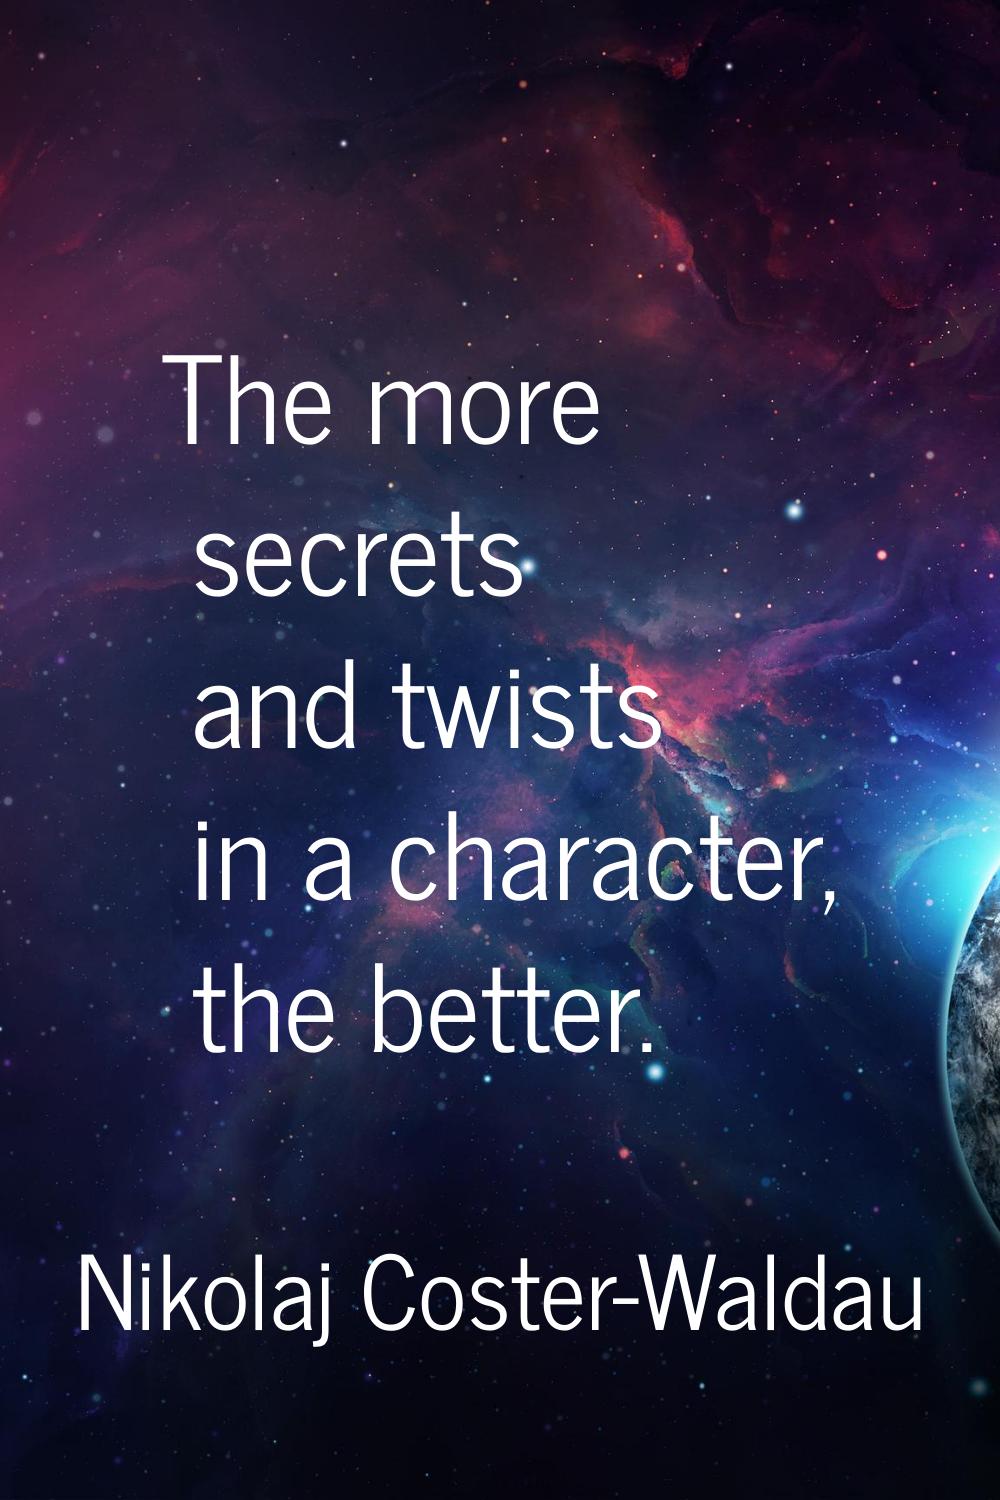 The more secrets and twists in a character, the better.